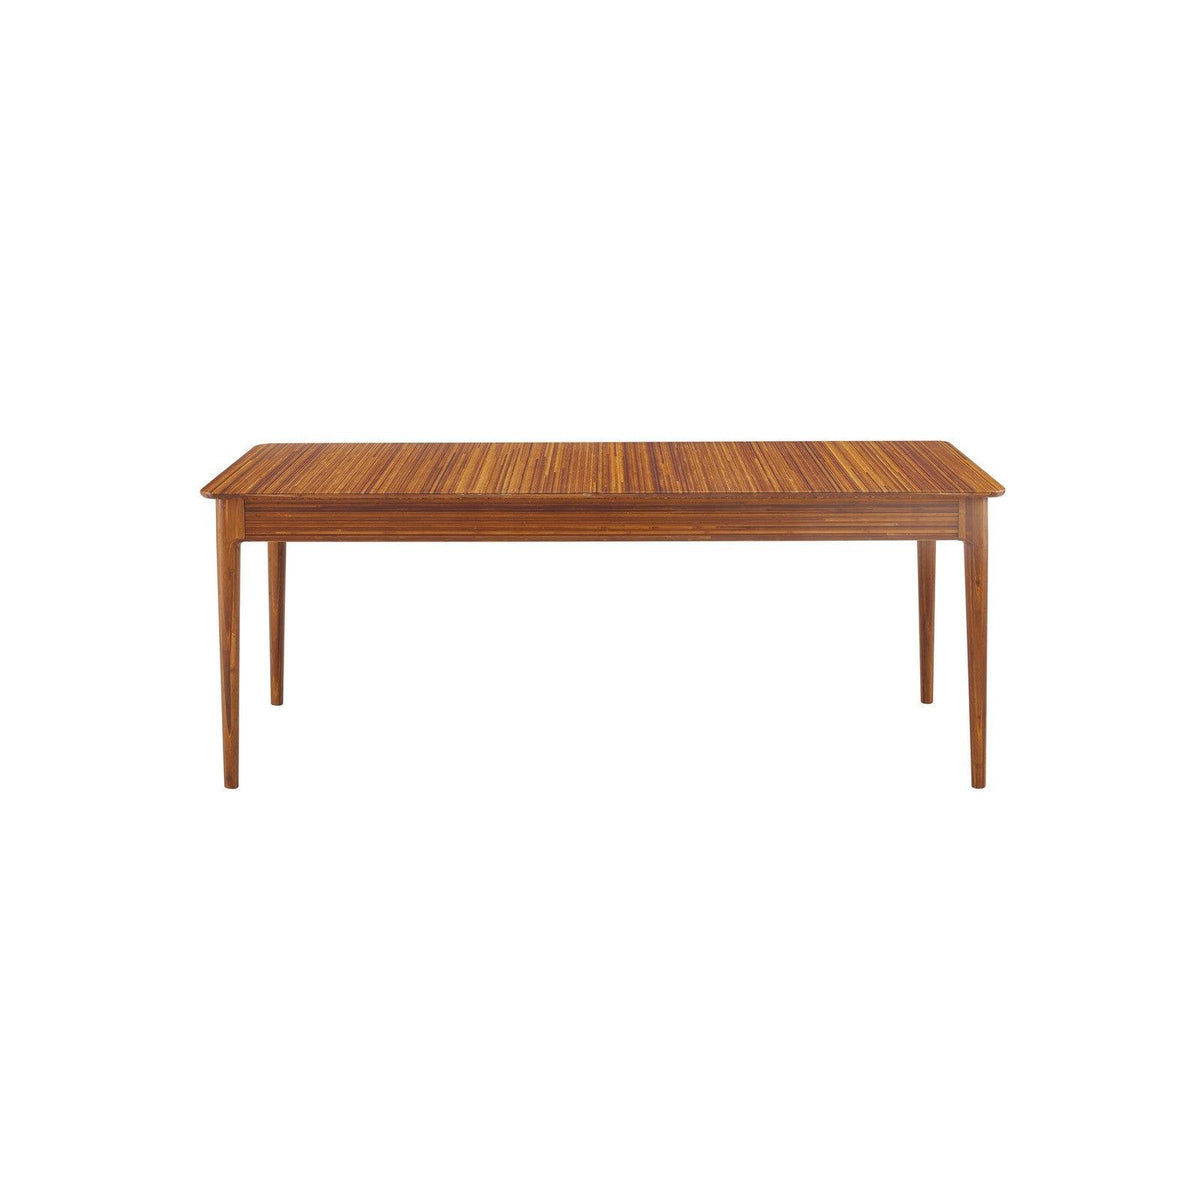 Greenington Erikka 110" Double-Leaves Extensible Dining Table, Amber - GE0001AM - 1